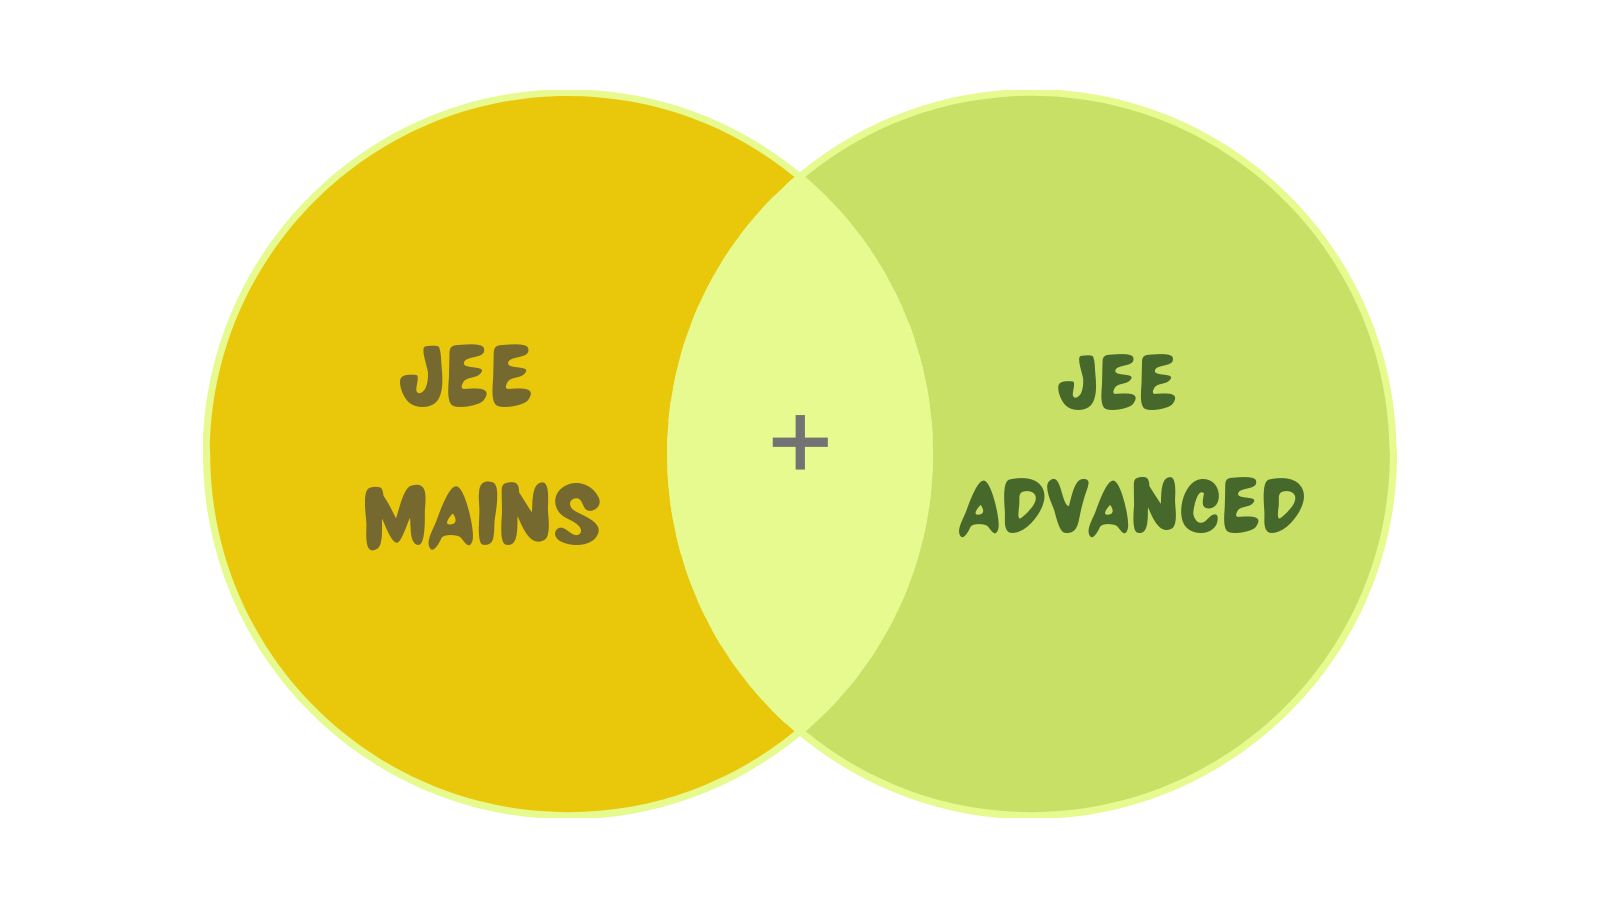 jee mains and jee advanced exam text on yellow green circle